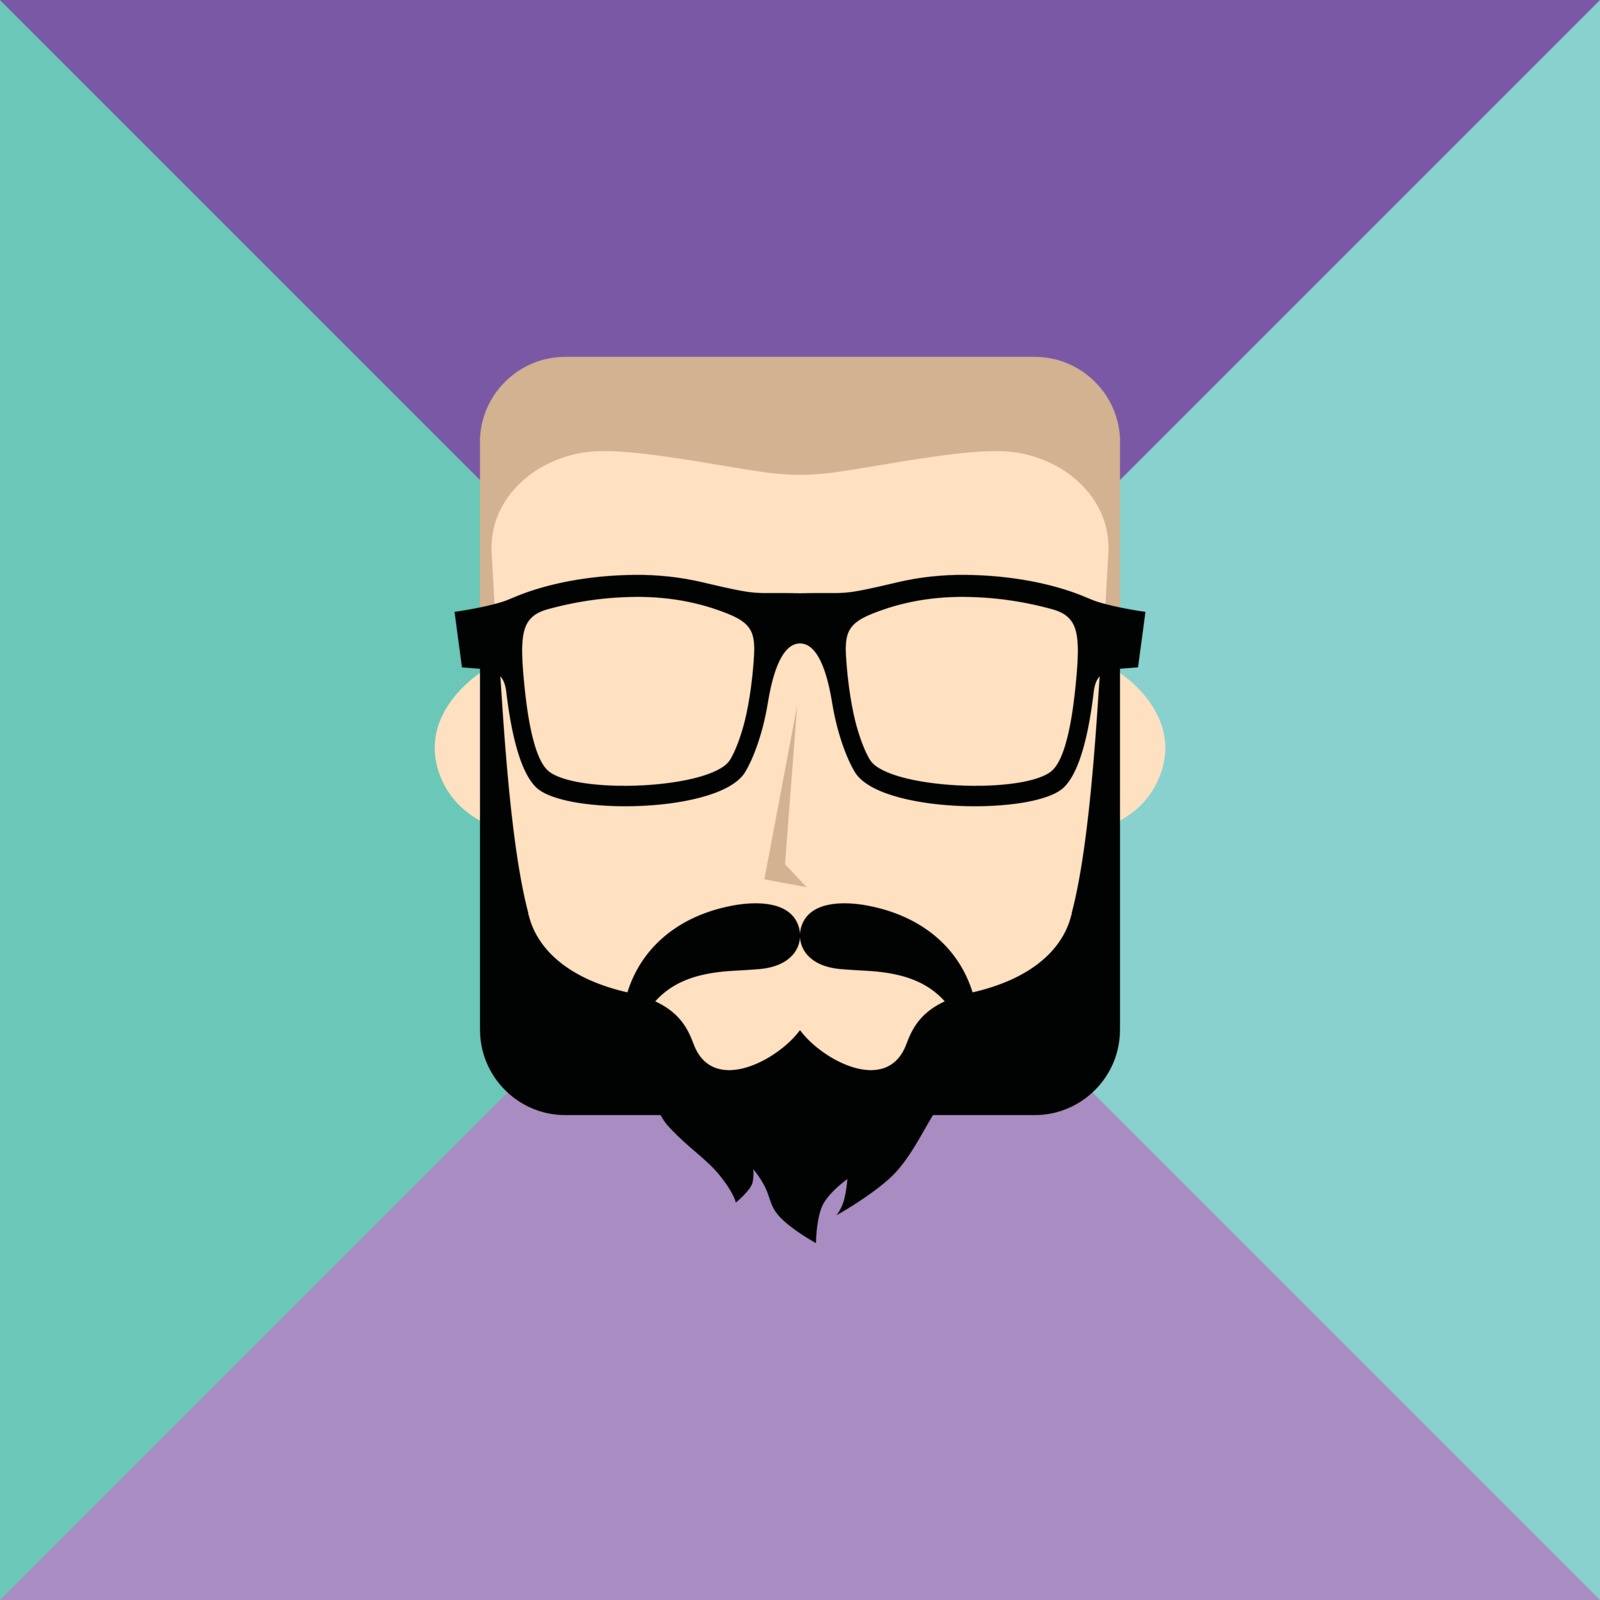 man hipster avatar user picture cartoon character vector illustration